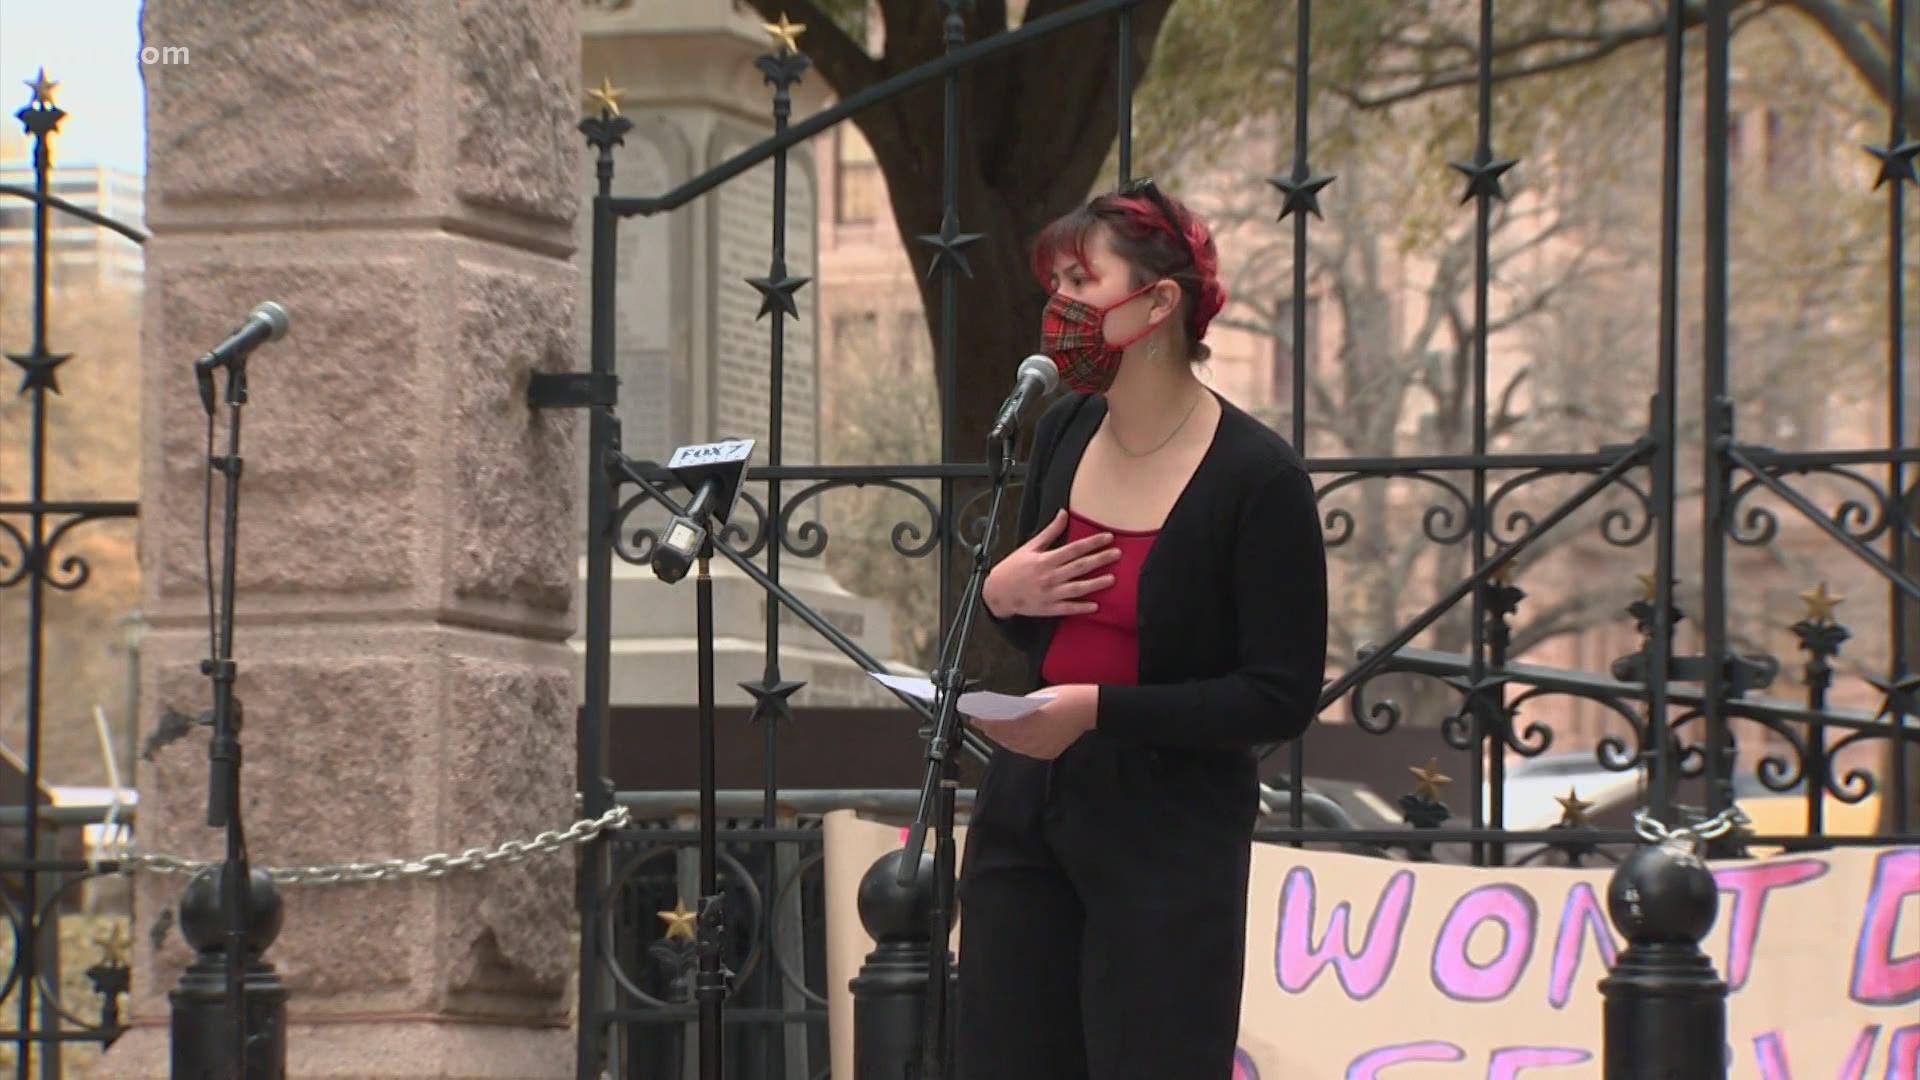 Demonstrators at the Texas Capitol spoke out against Gov. Greg Abbott's order to lift the mask mandate. Service industry workers are also asking to be vaccinated.